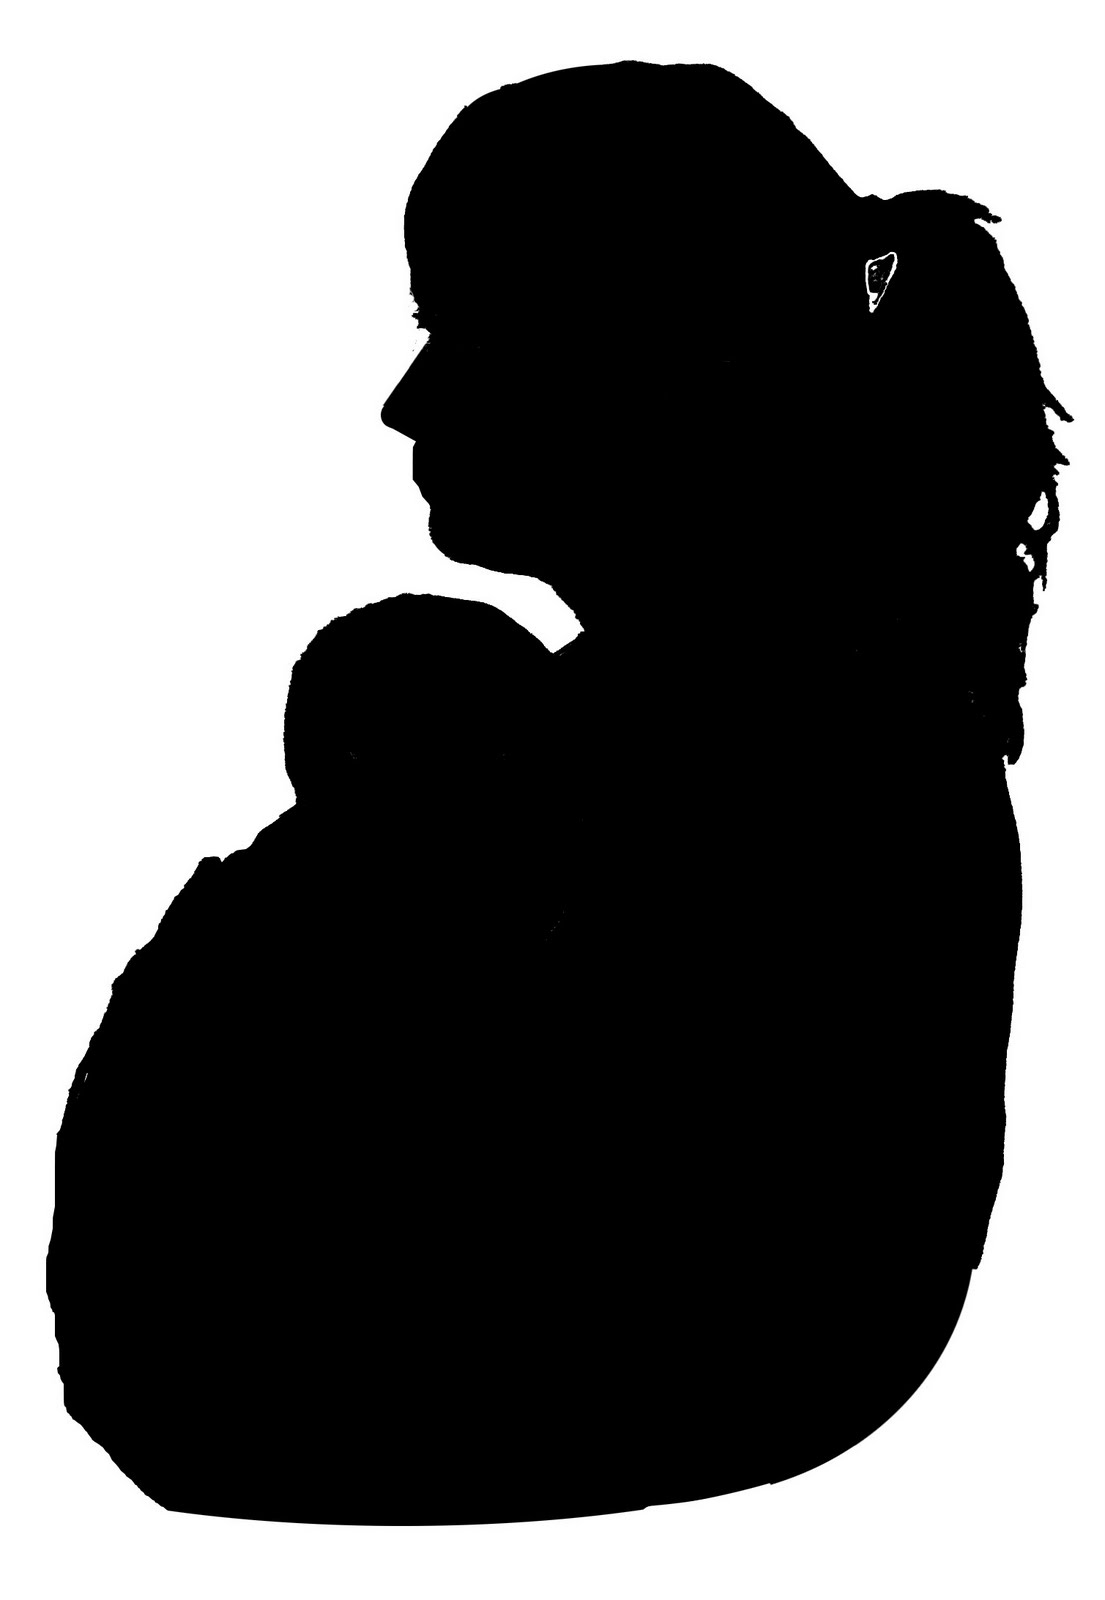 Mother holding baby silhouette clipart - ClipartFox